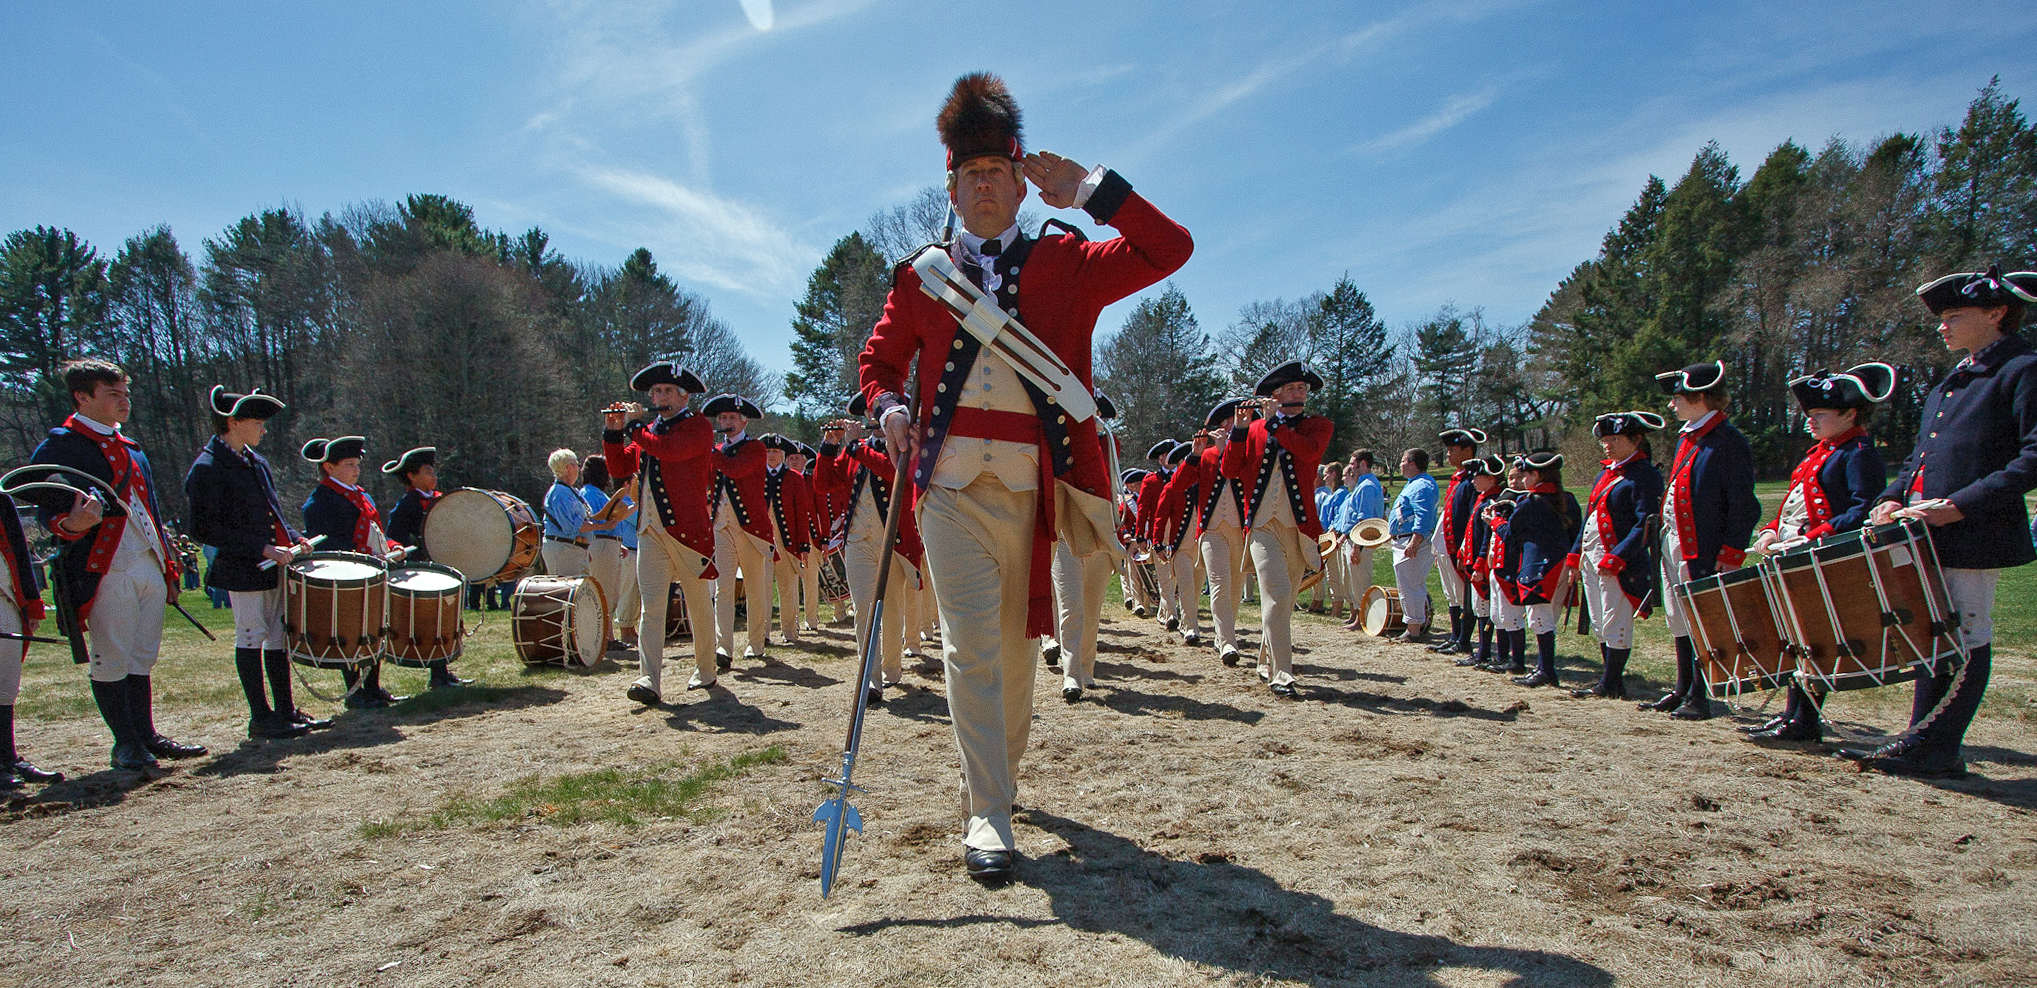 US Army Old Guard Fife and Drum Corps by SFC Richard Ruddle Flickr